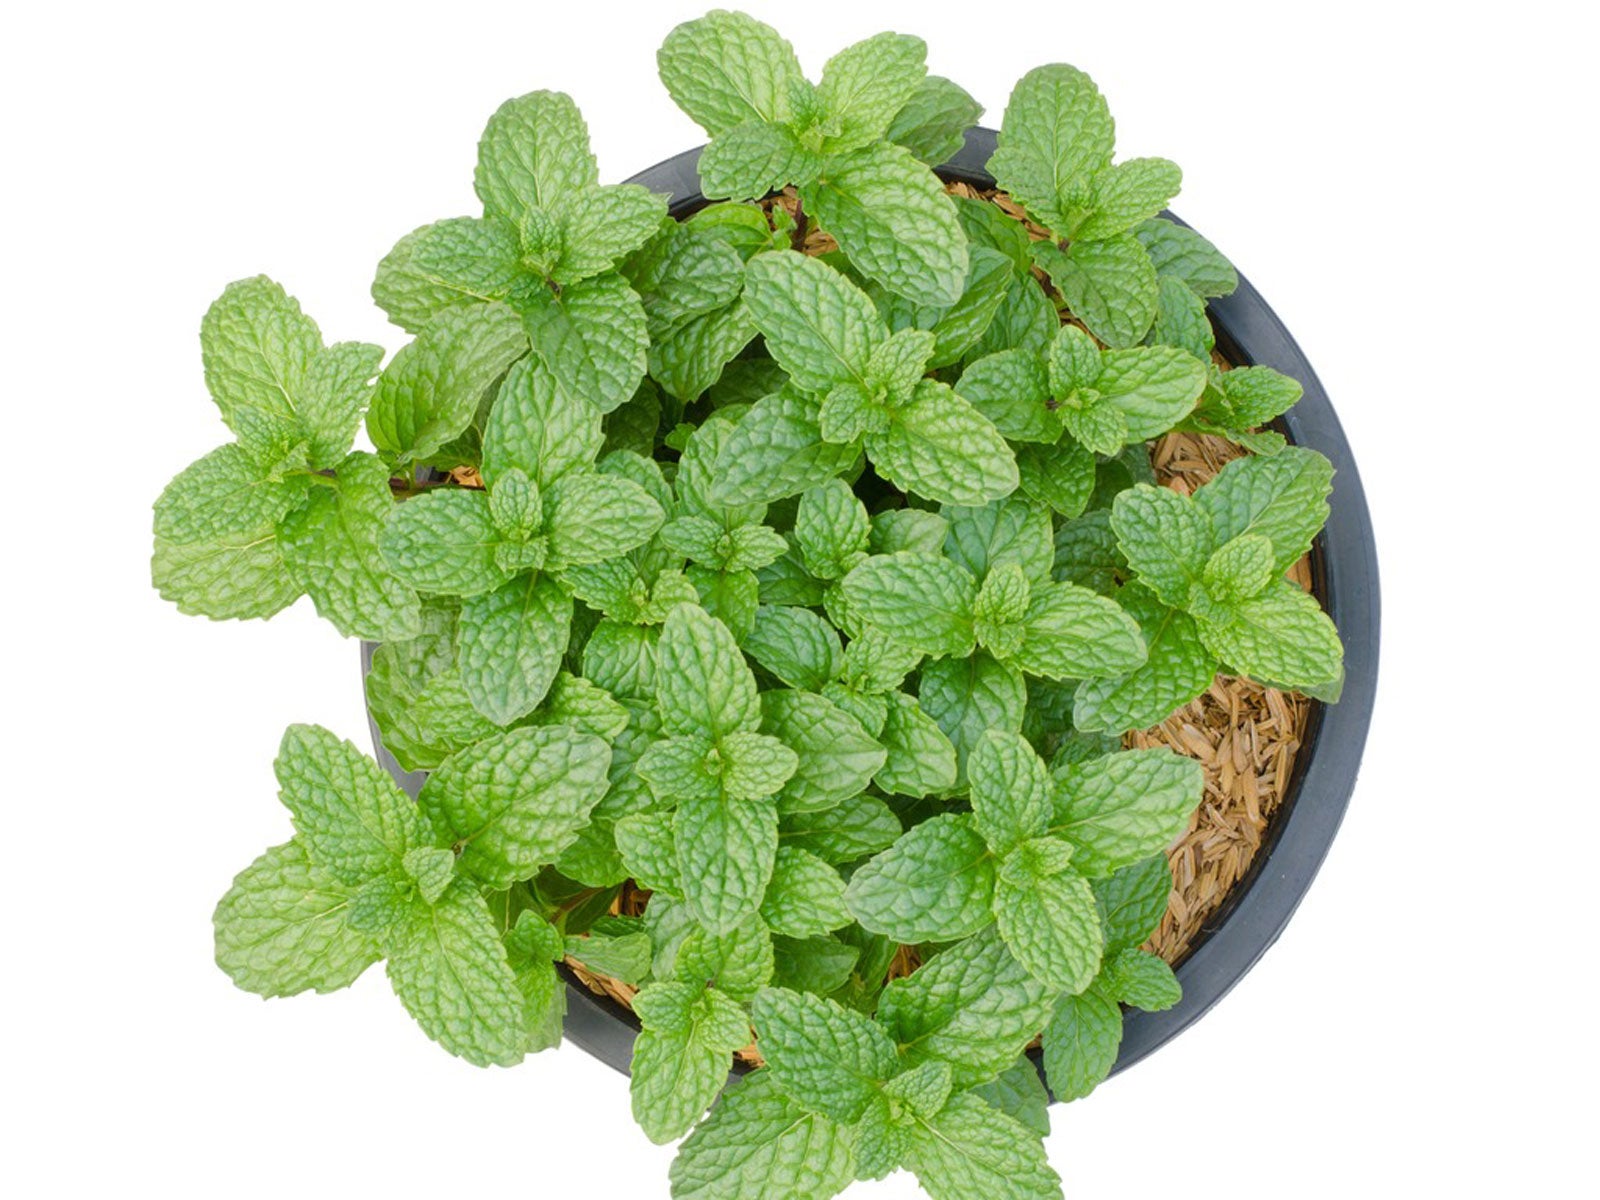 Care of Peppermint - How To Grow Peppermint Plants